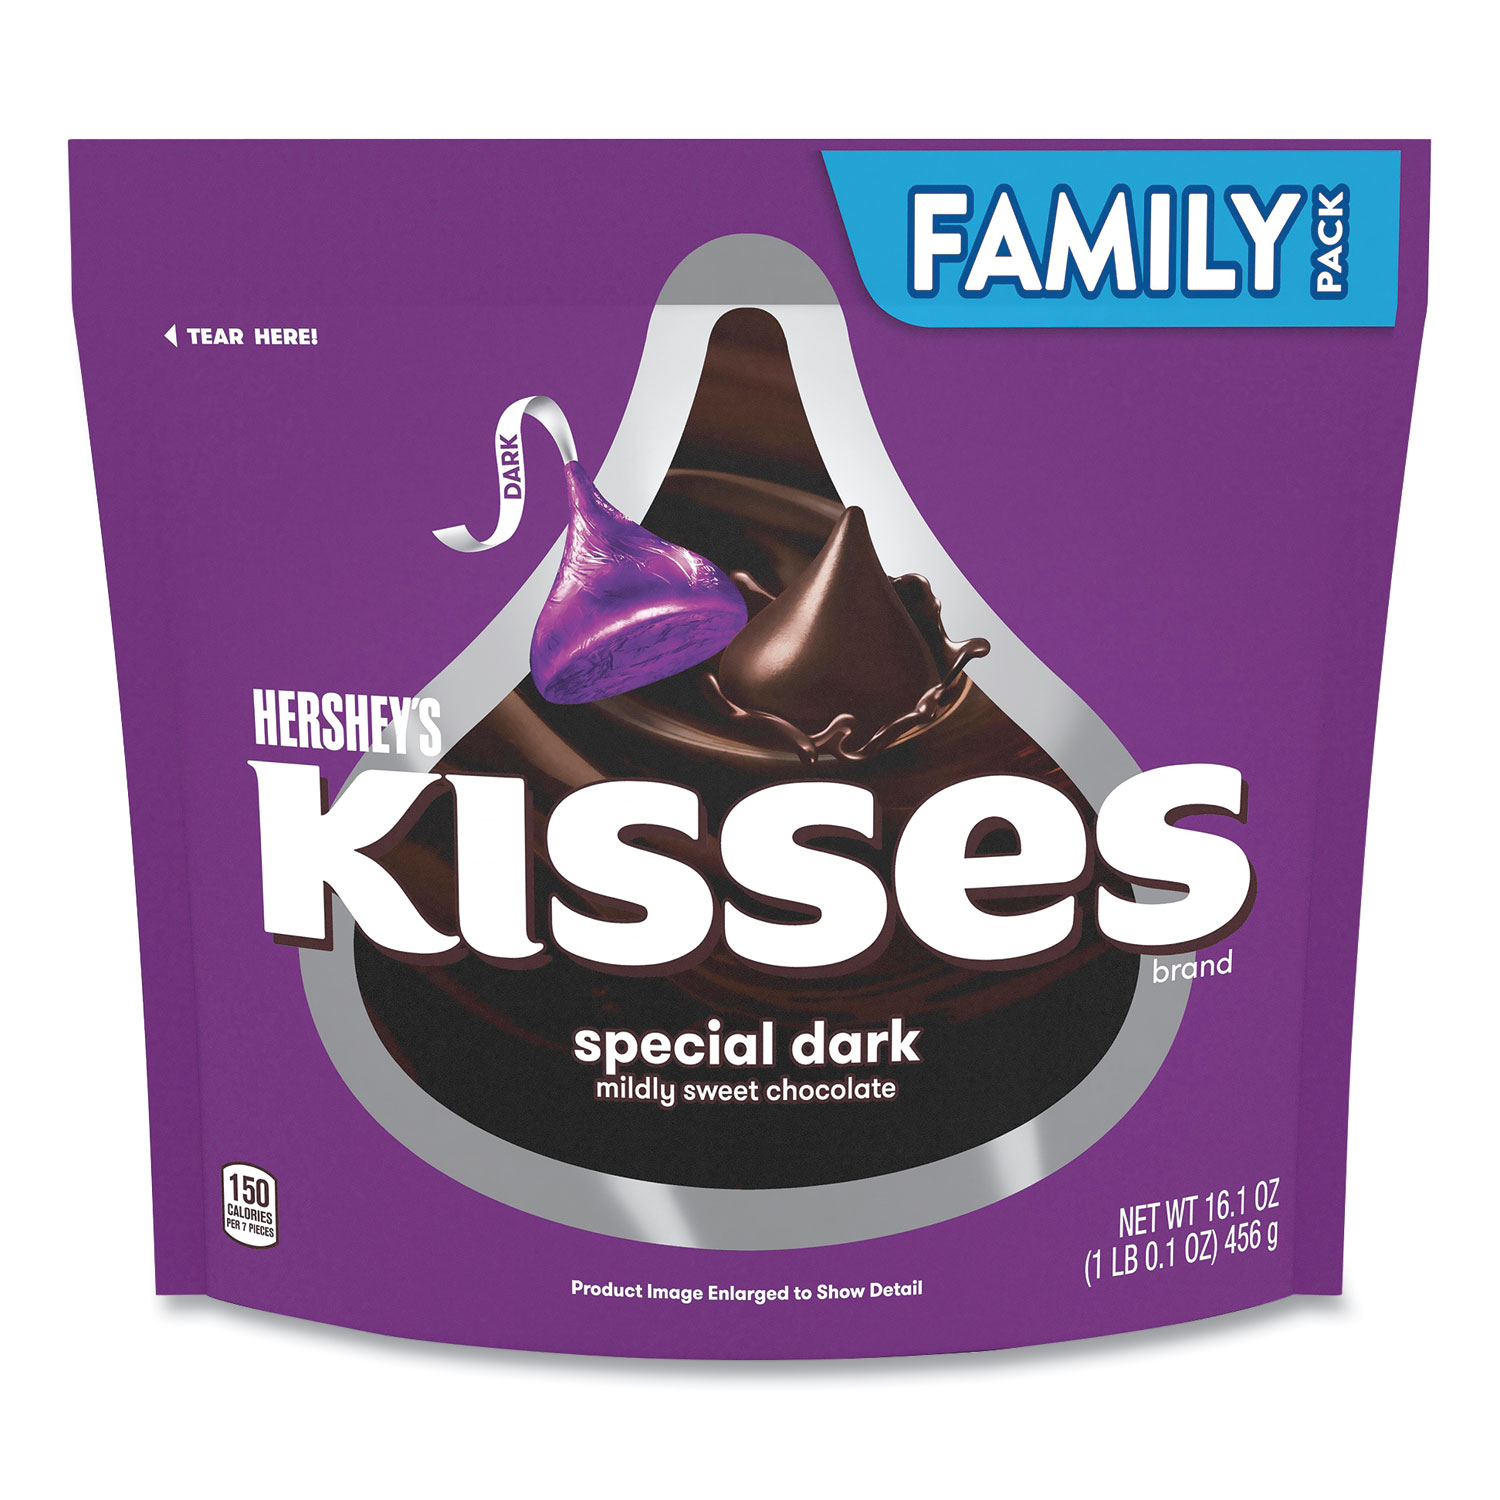  Hershey's 14060 KISSES Special Dark Chocolate Candy, Family Pack, 16.1 oz Bag, 2 Bags/Pack, Free Delivery in 1-4 Business Days (GRR24600424) 